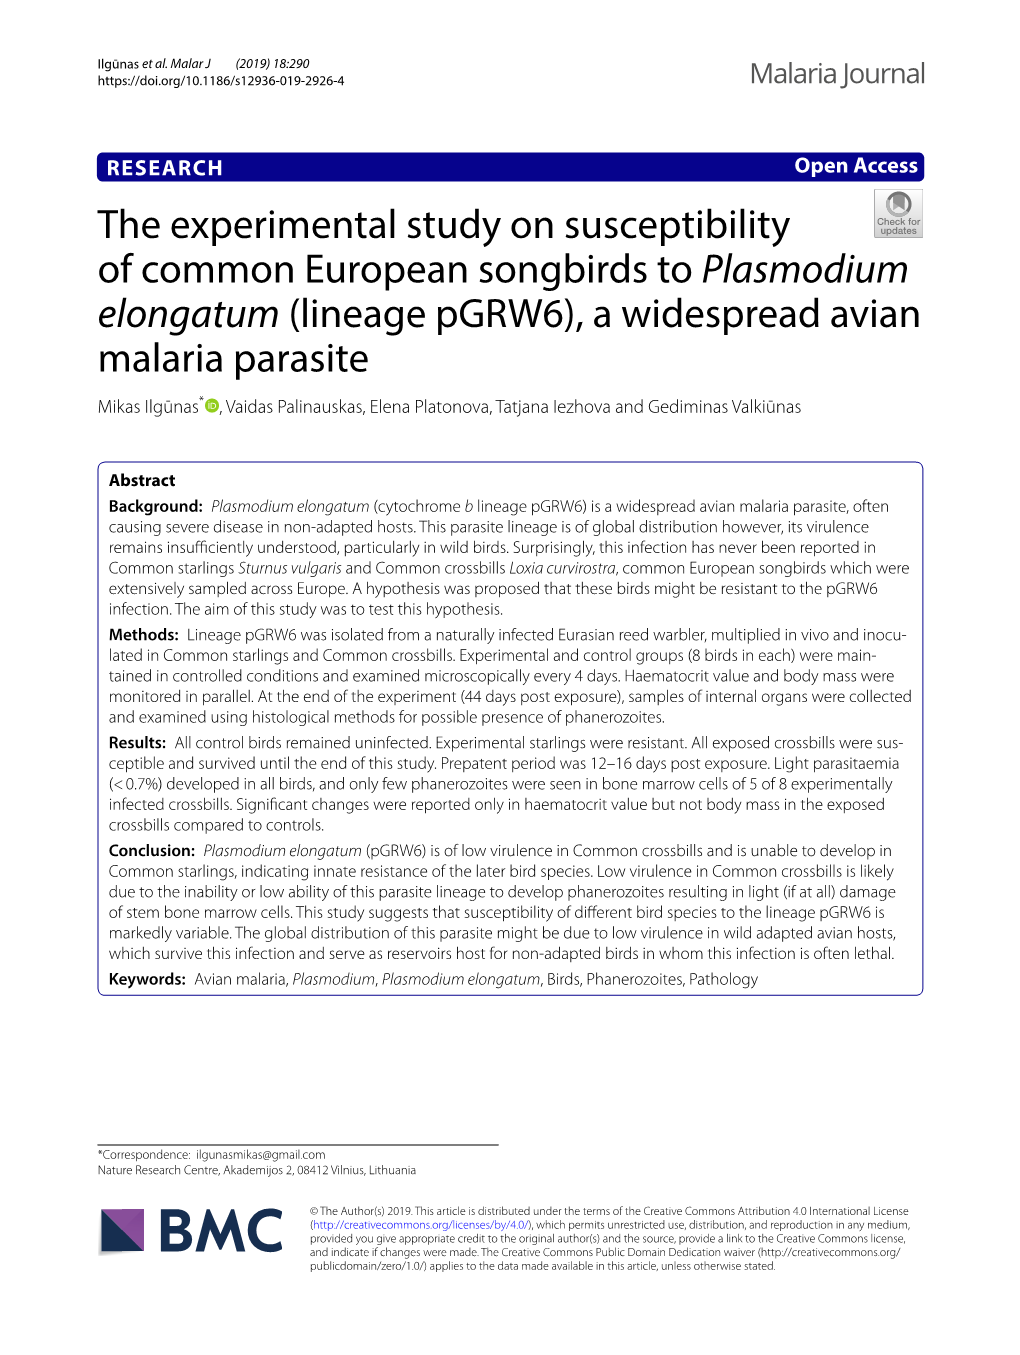 The Experimental Study on Susceptibility of Common European